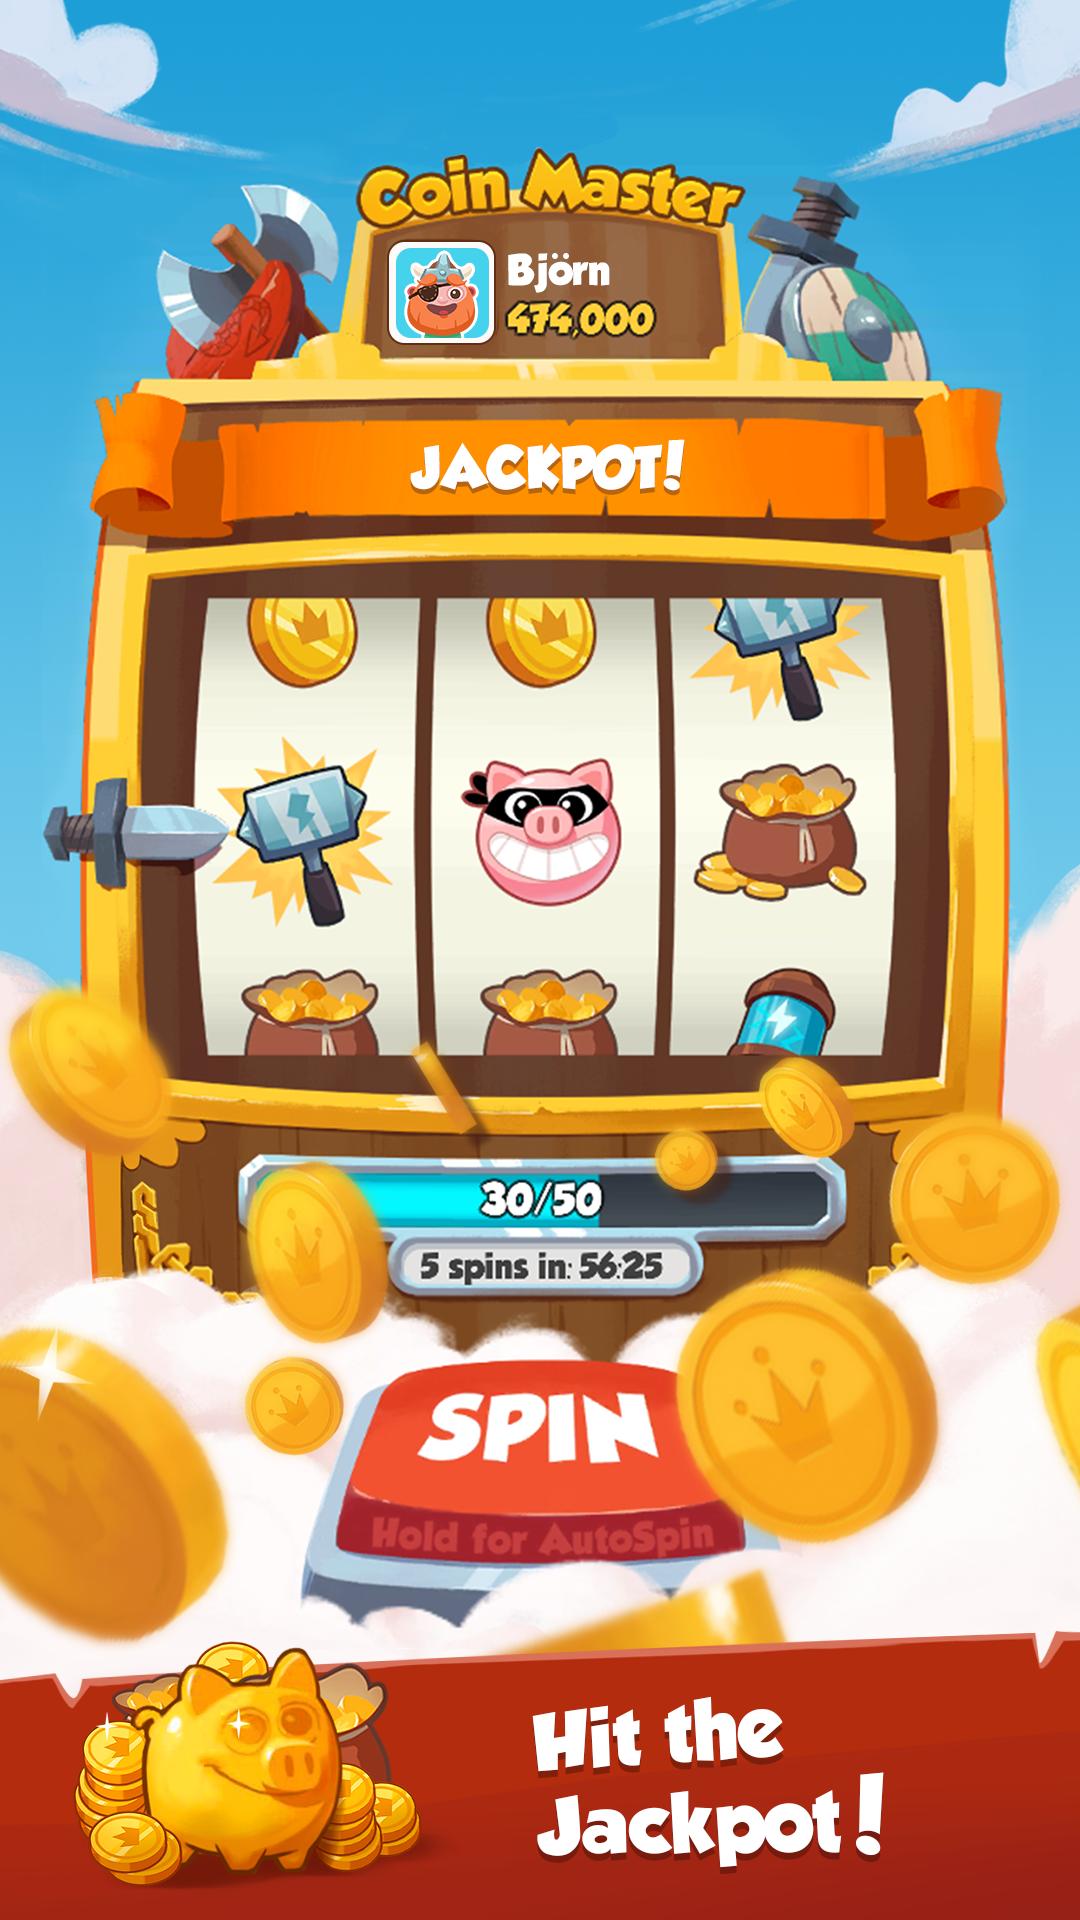 coin master free spins and coins app download